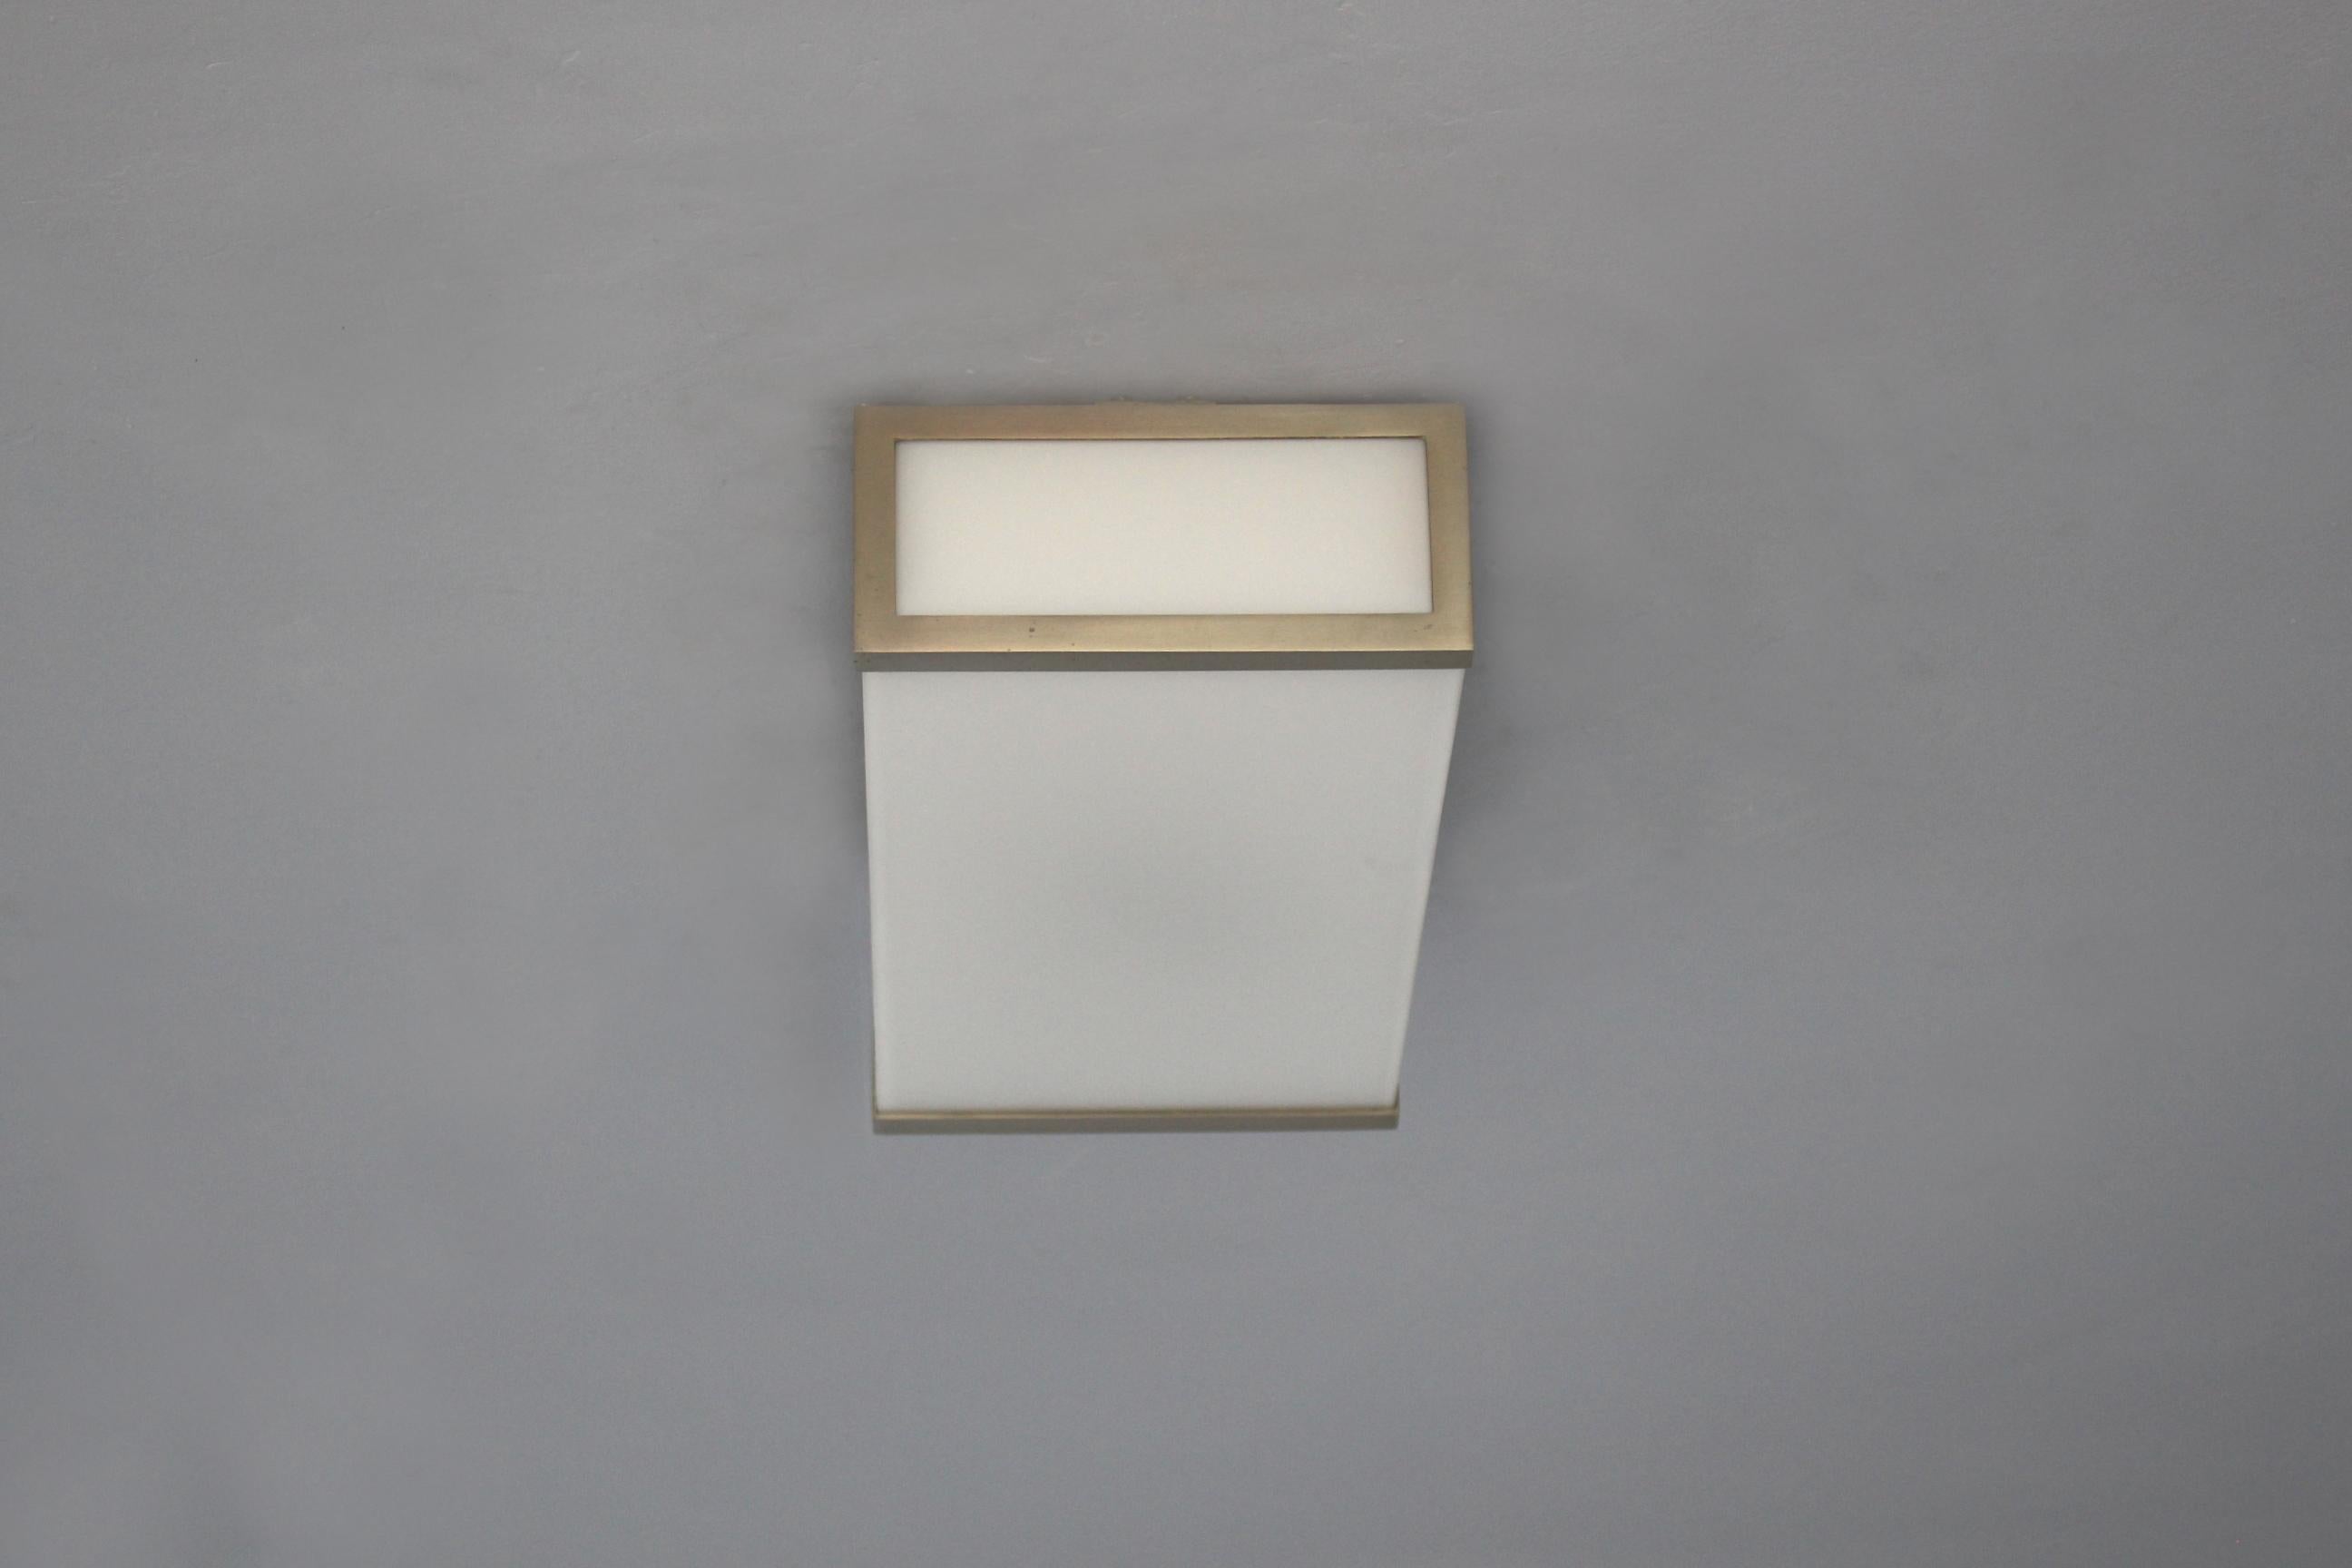 French 5 Fine 1950s Small Rectangular Flush Mounts or Sconces by Jean Perzel